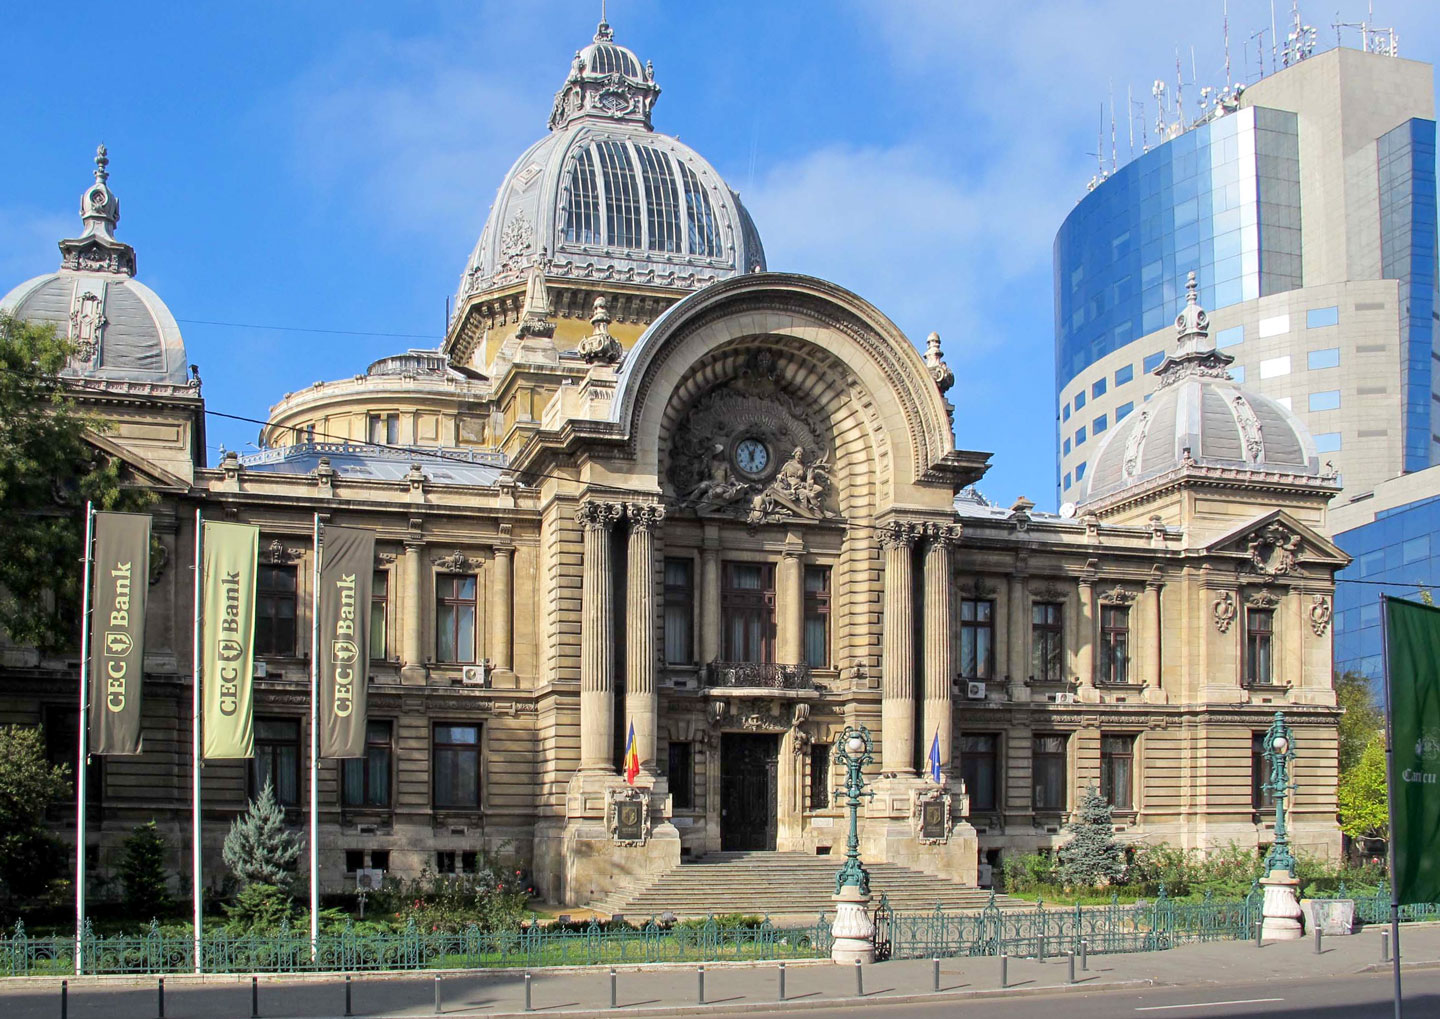 The Central Bank of Romania Palace in Bucharest